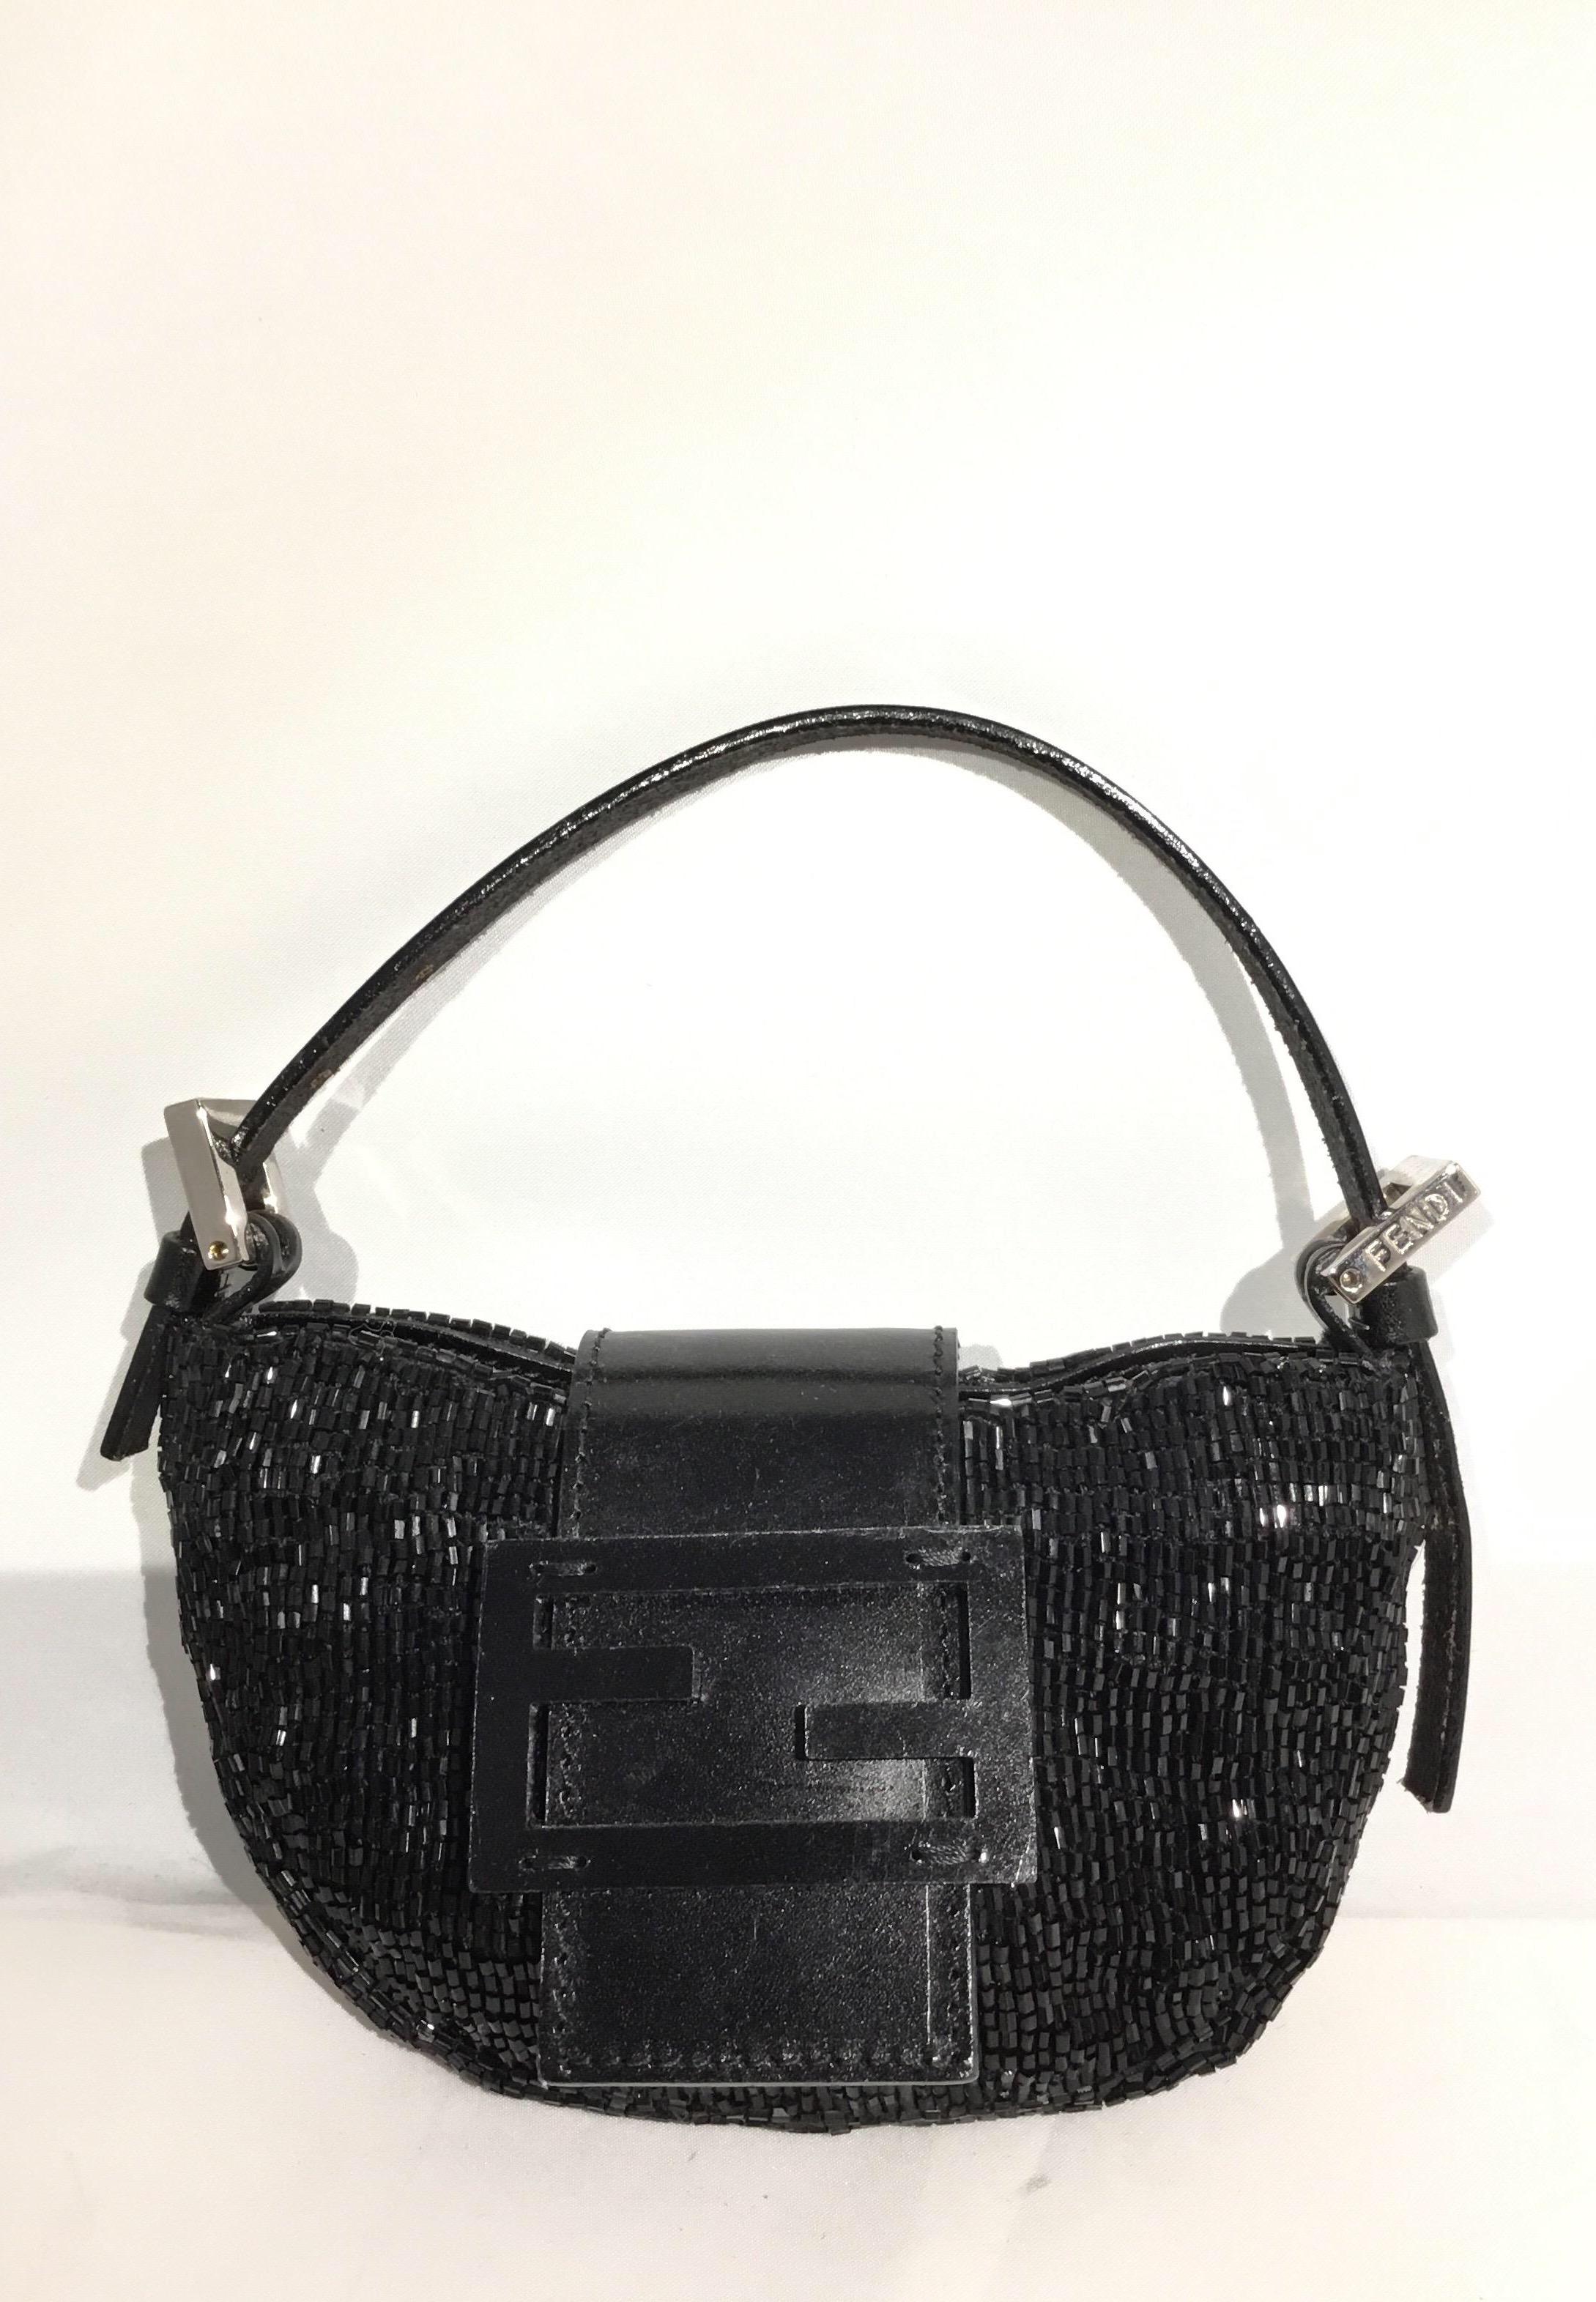 Fendi Mini baguette featured in black and fully beaded with a flat leather top handle attached with silvertone hardware and a signature Fendi flap-snap closure. Bag has a canvas lining and a original dustbag is included. Bag is in excellent